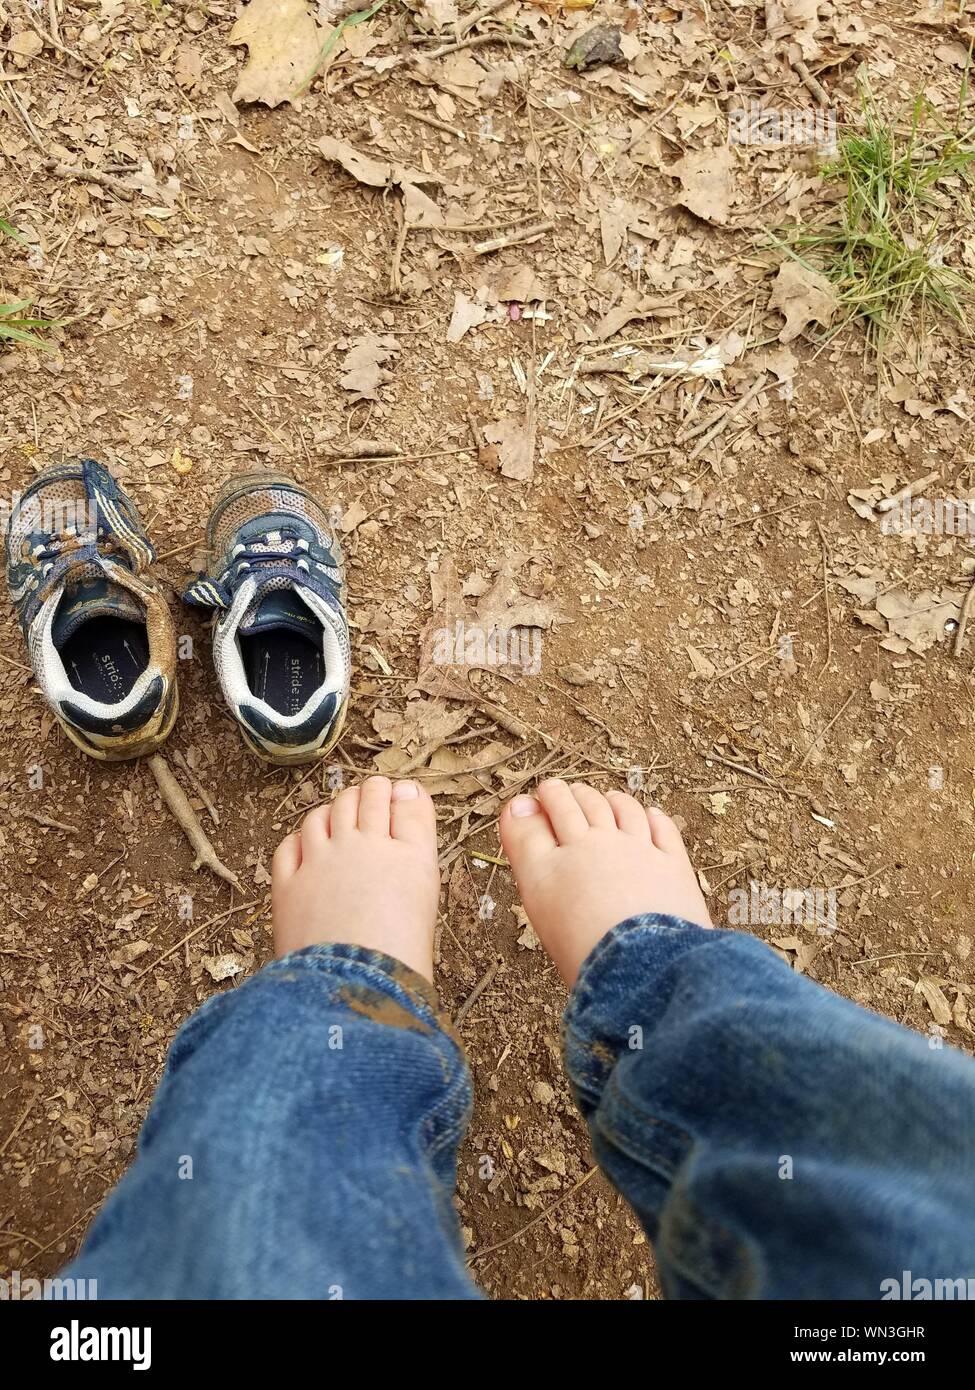 Low Angle View Of Barefoot Child By Dirt Shoes Stock Photo